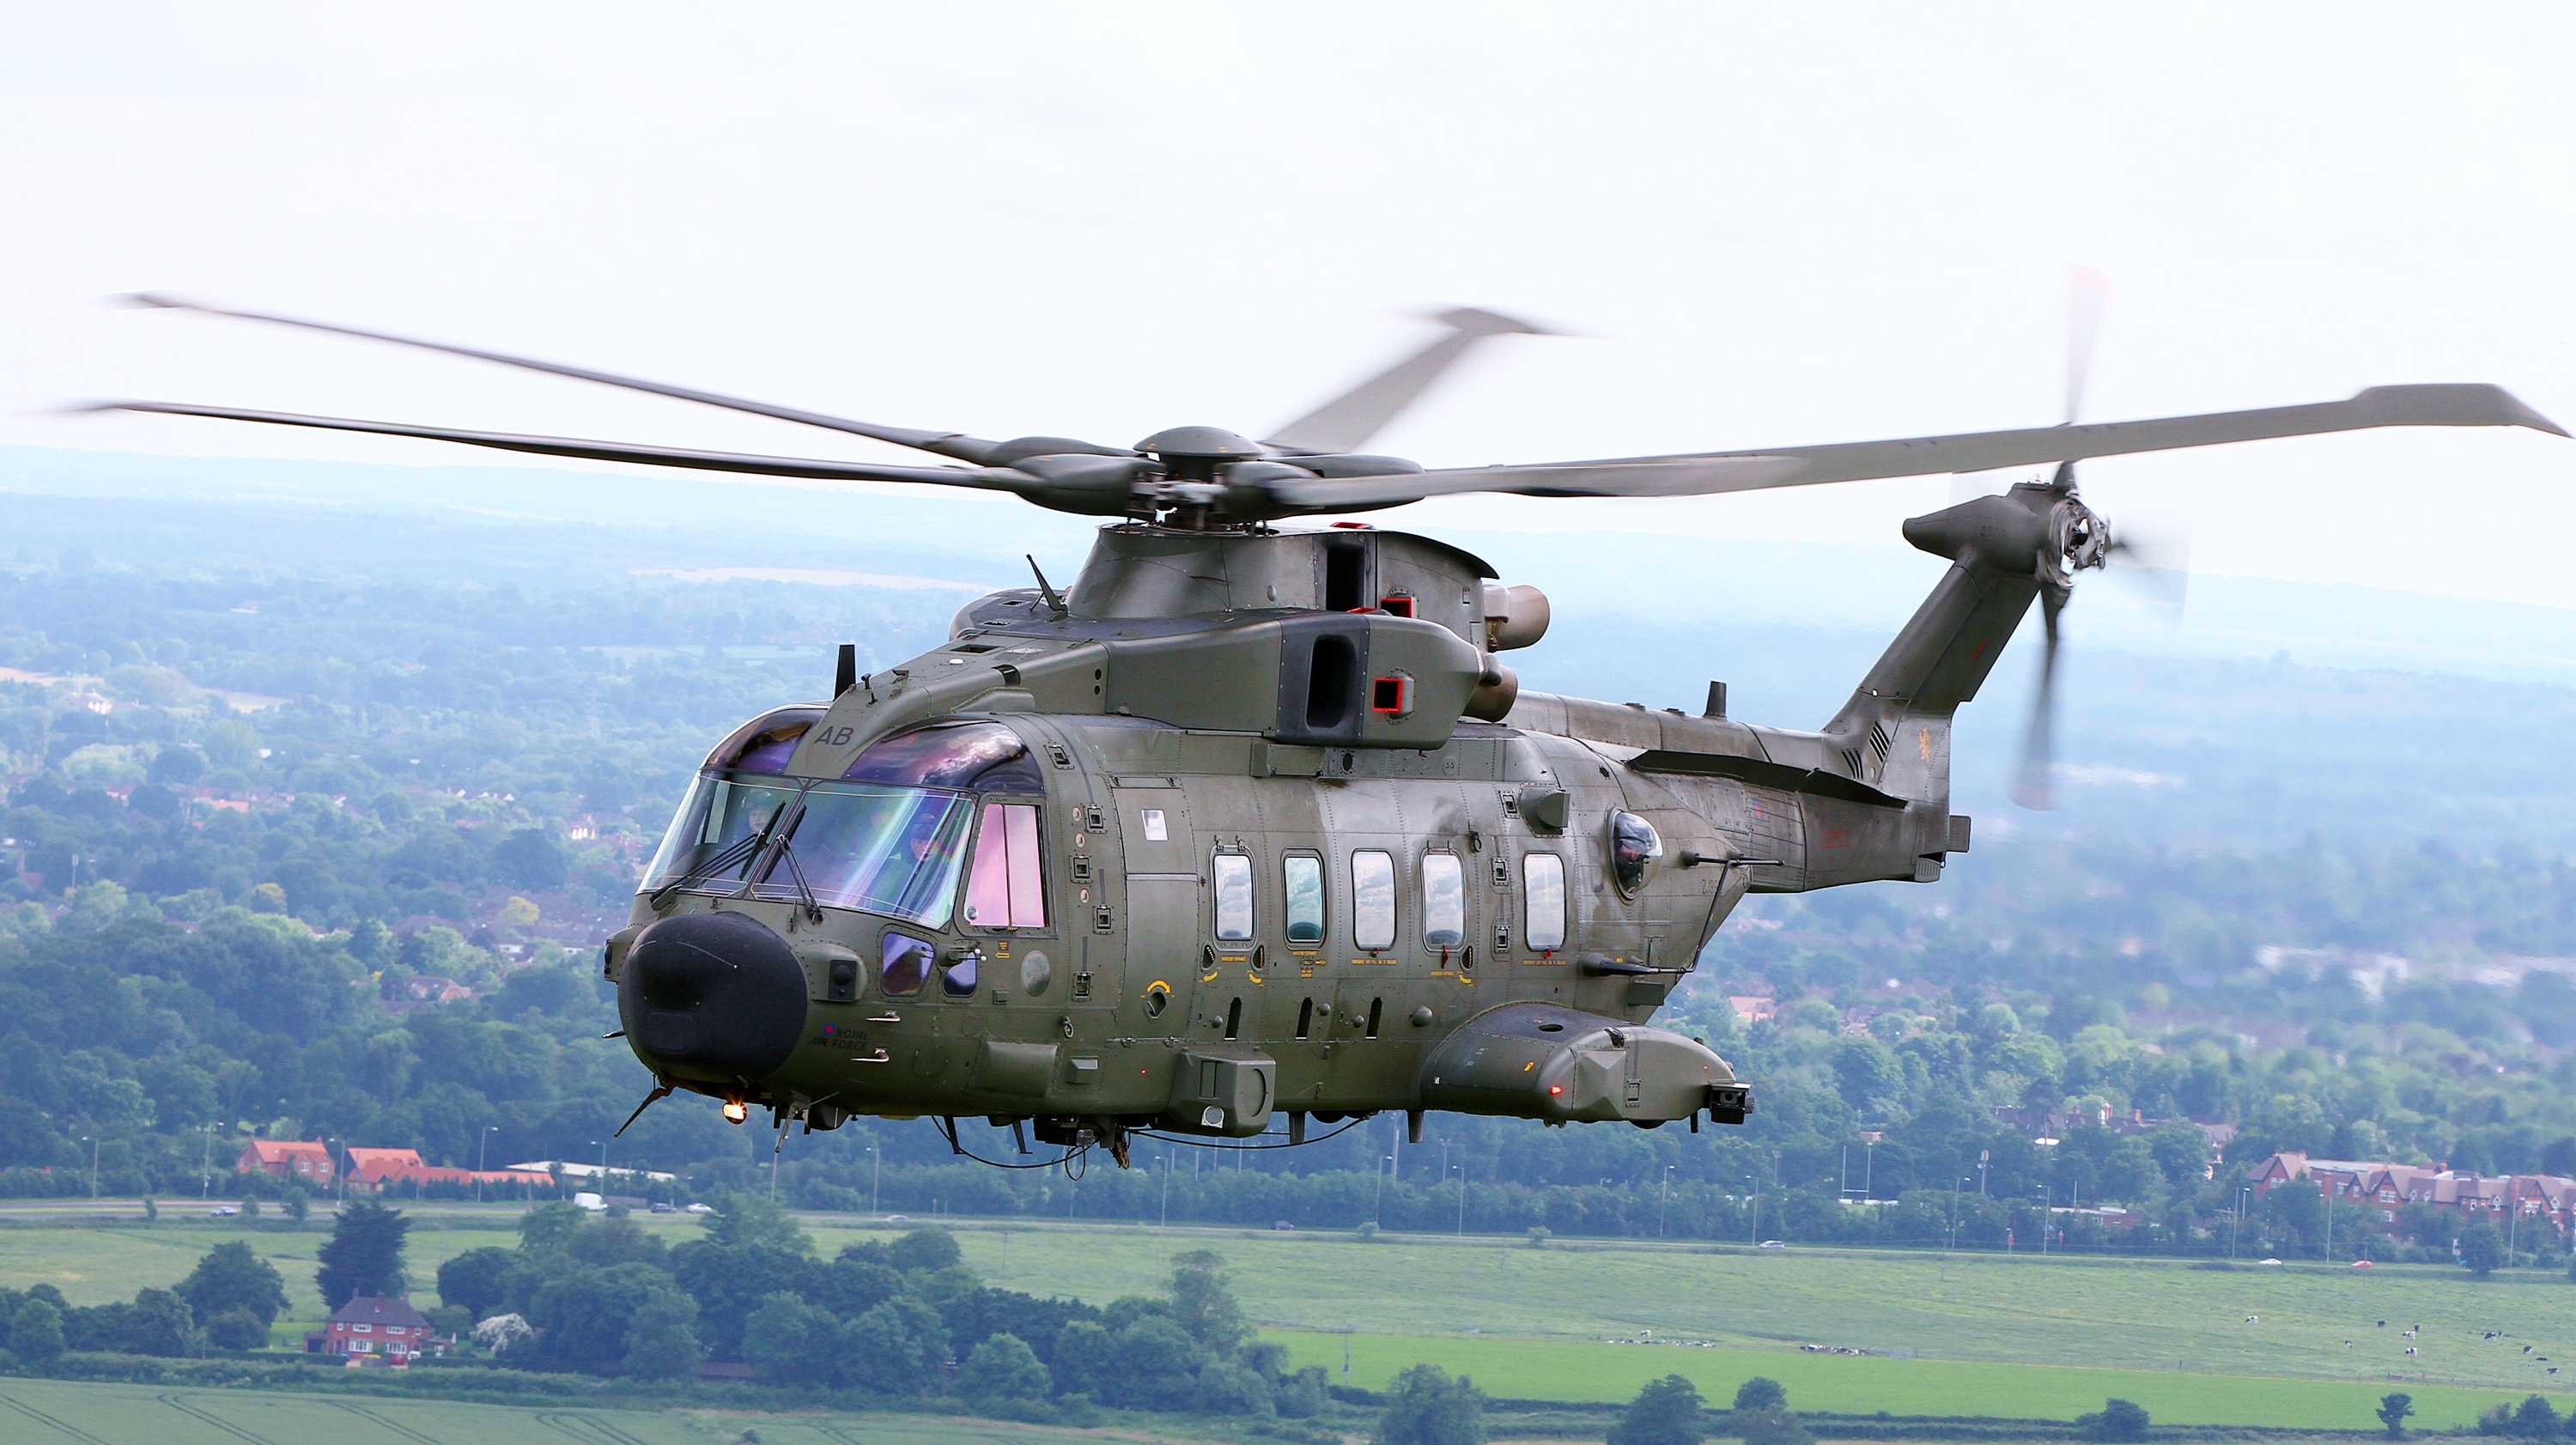 Royal_Air_Force_Merlin_HC3A_helicopter_training_flight_over_Oxfordshire%2C_Buckinghamshire.jpg